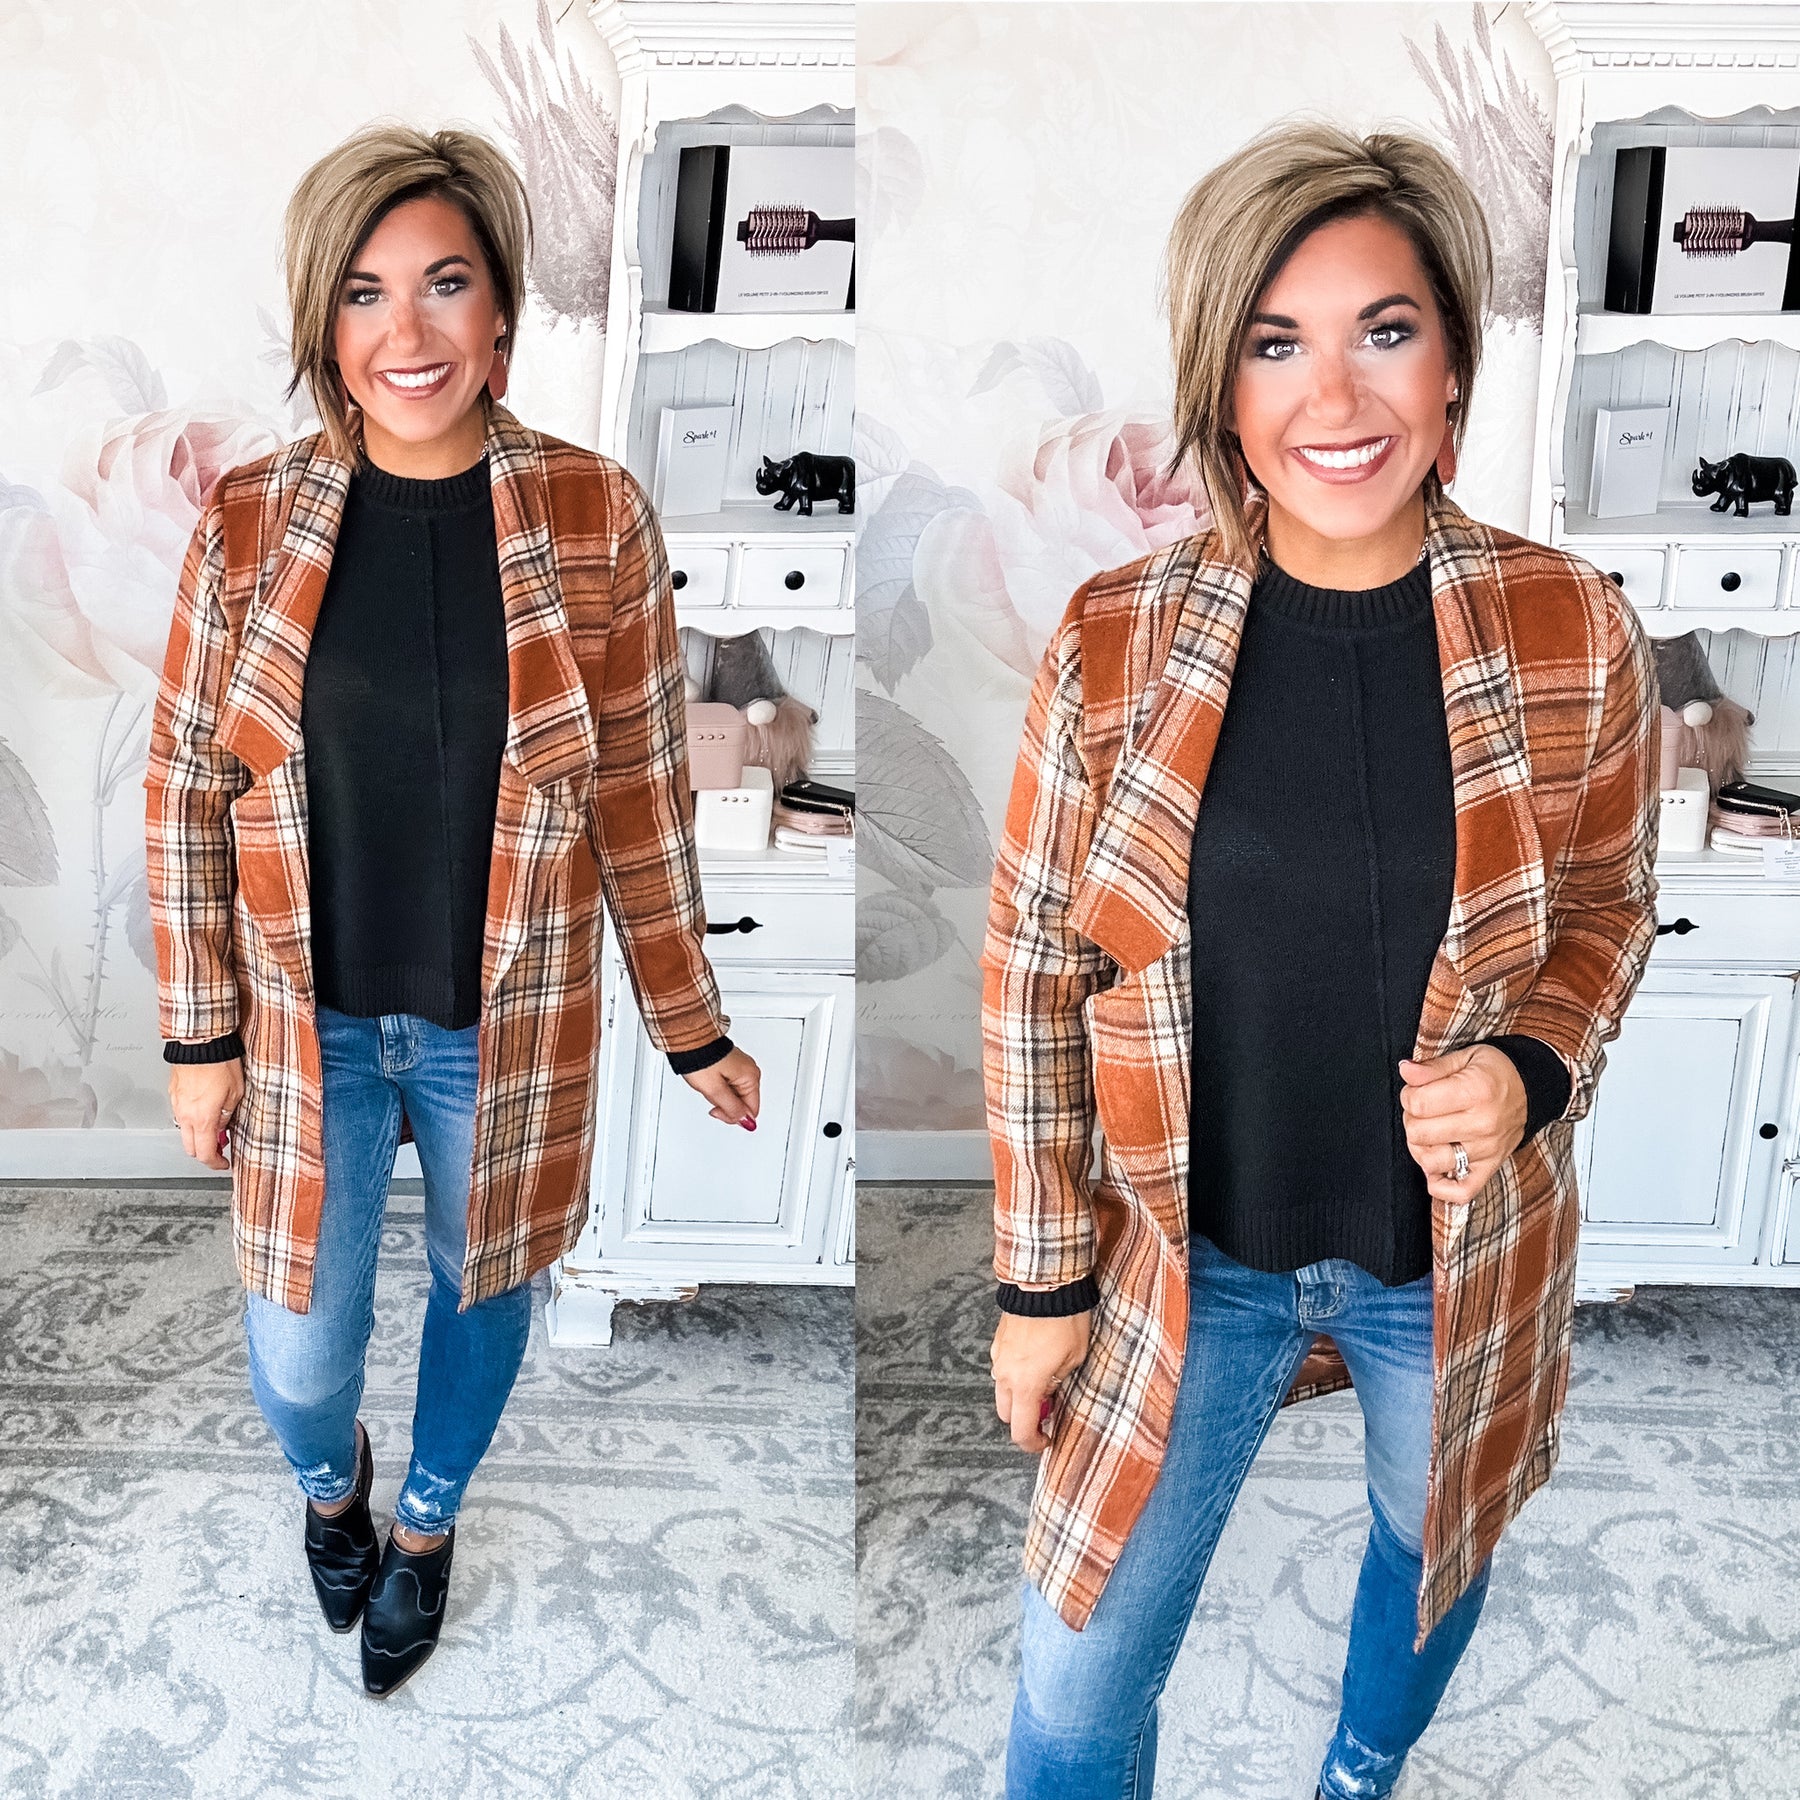 In The Air Plaid Jacket - Rust